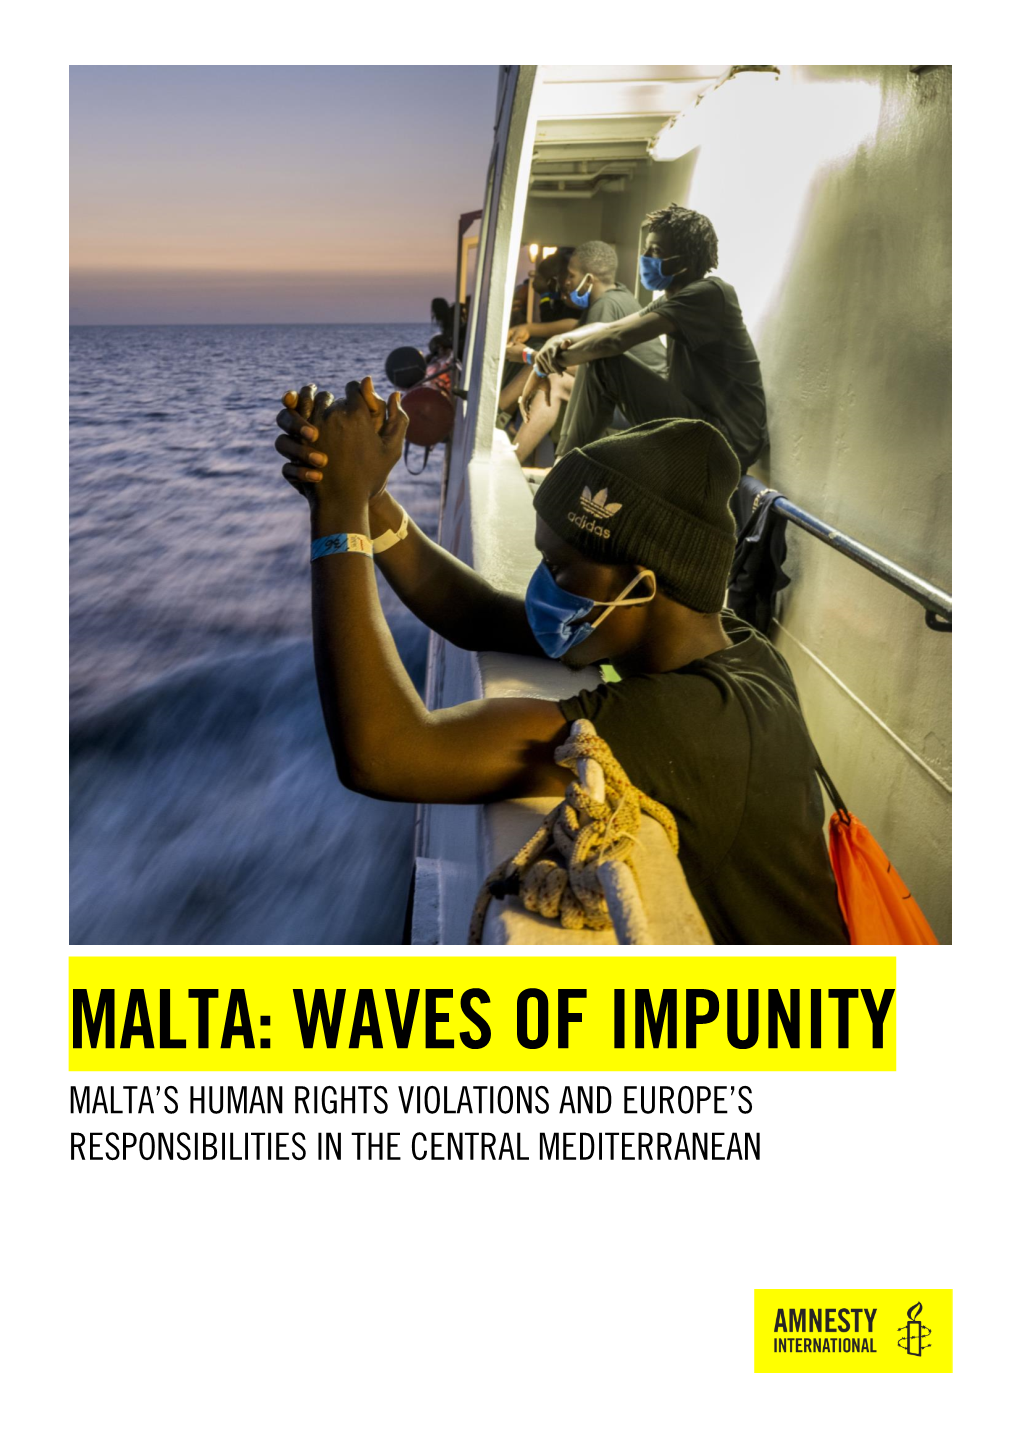 Malta's Violations of the Rights of Refugees and Migrants in The